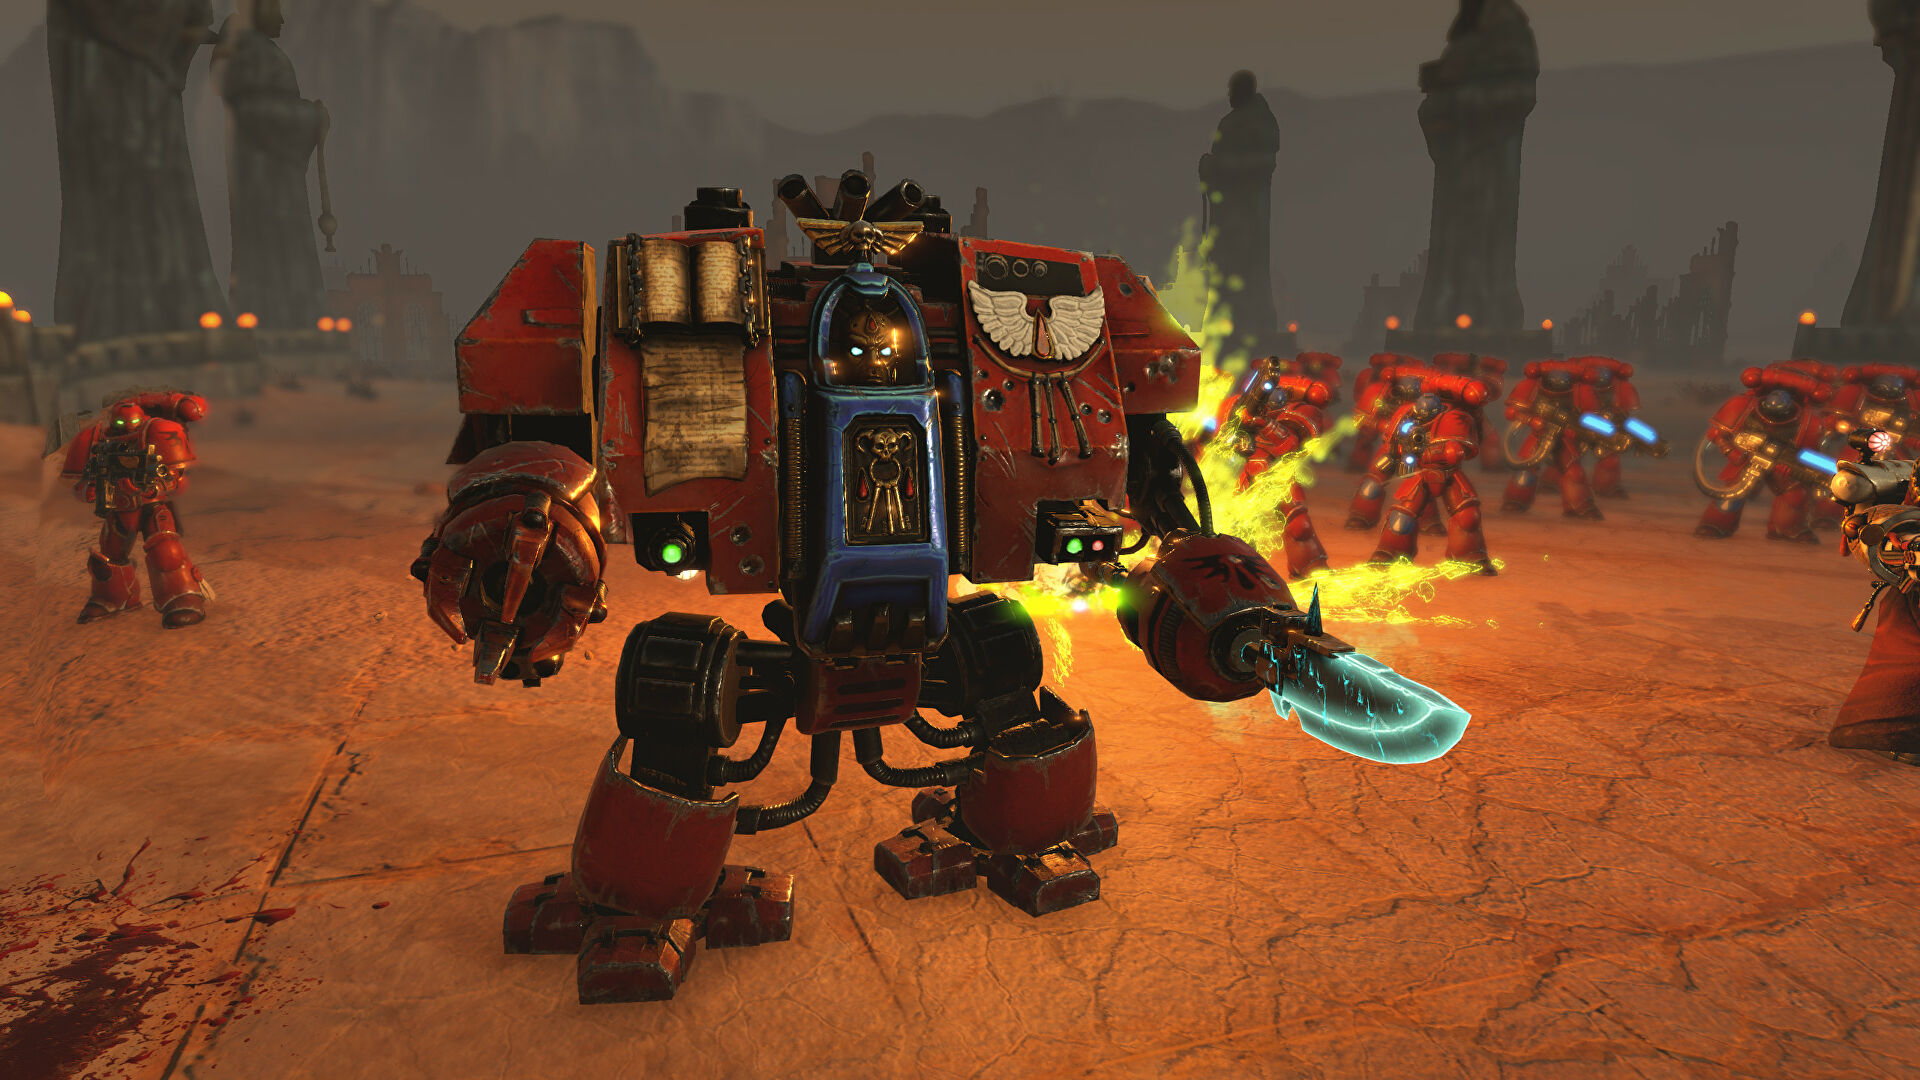 Warhammer 40,000: Battlesector on Game Pass lured me into turn-based tactics with a familiar setting